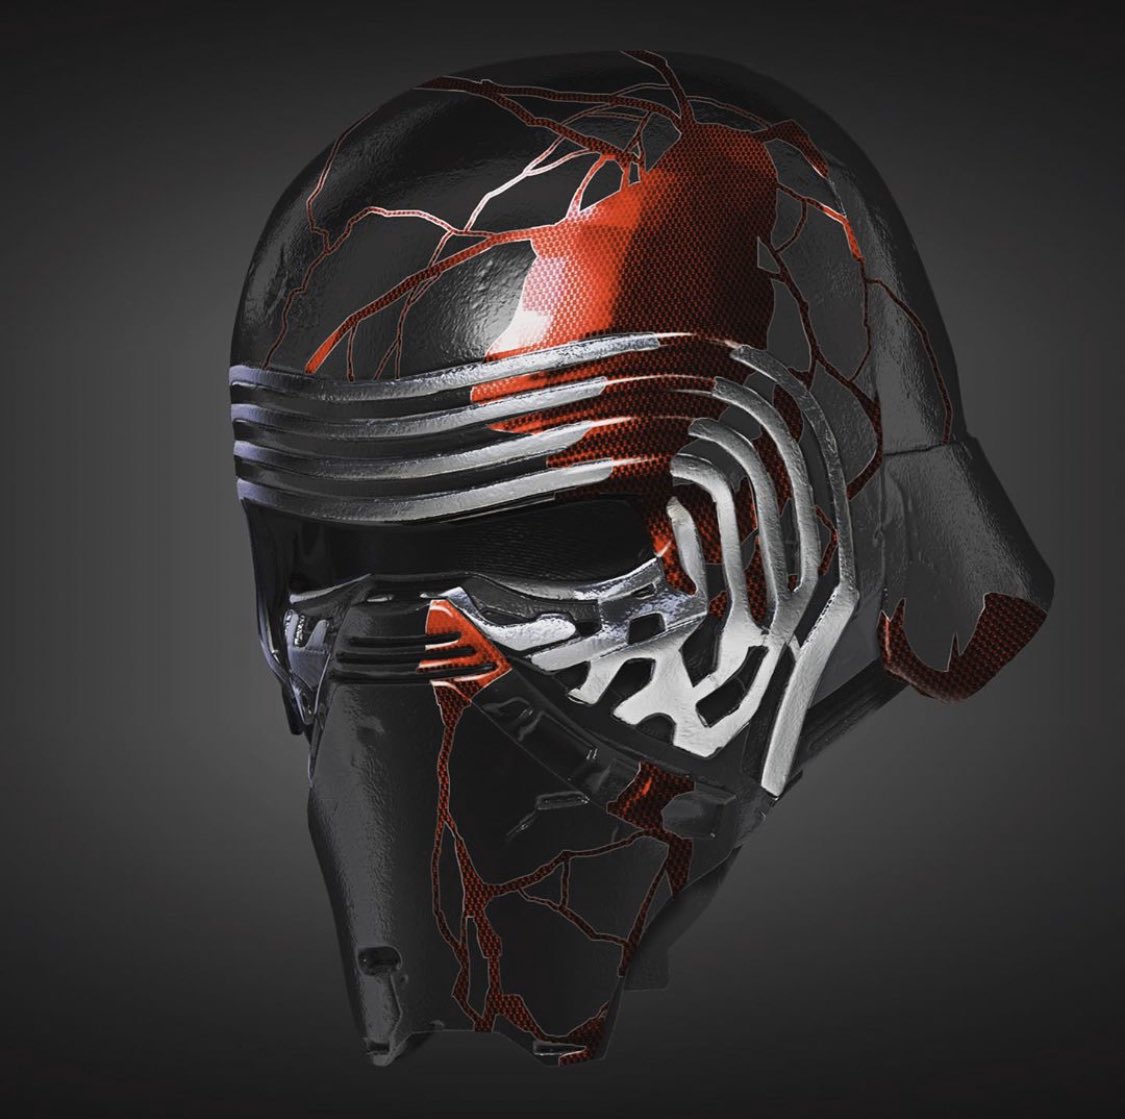 Phil Szostak What To Do With Kyloren S Broken Mask Weirdly Both Lead Costume Concept Artist Glyn Dillon And I Came Up With A Similar Solution Based On The Japanese Art Of